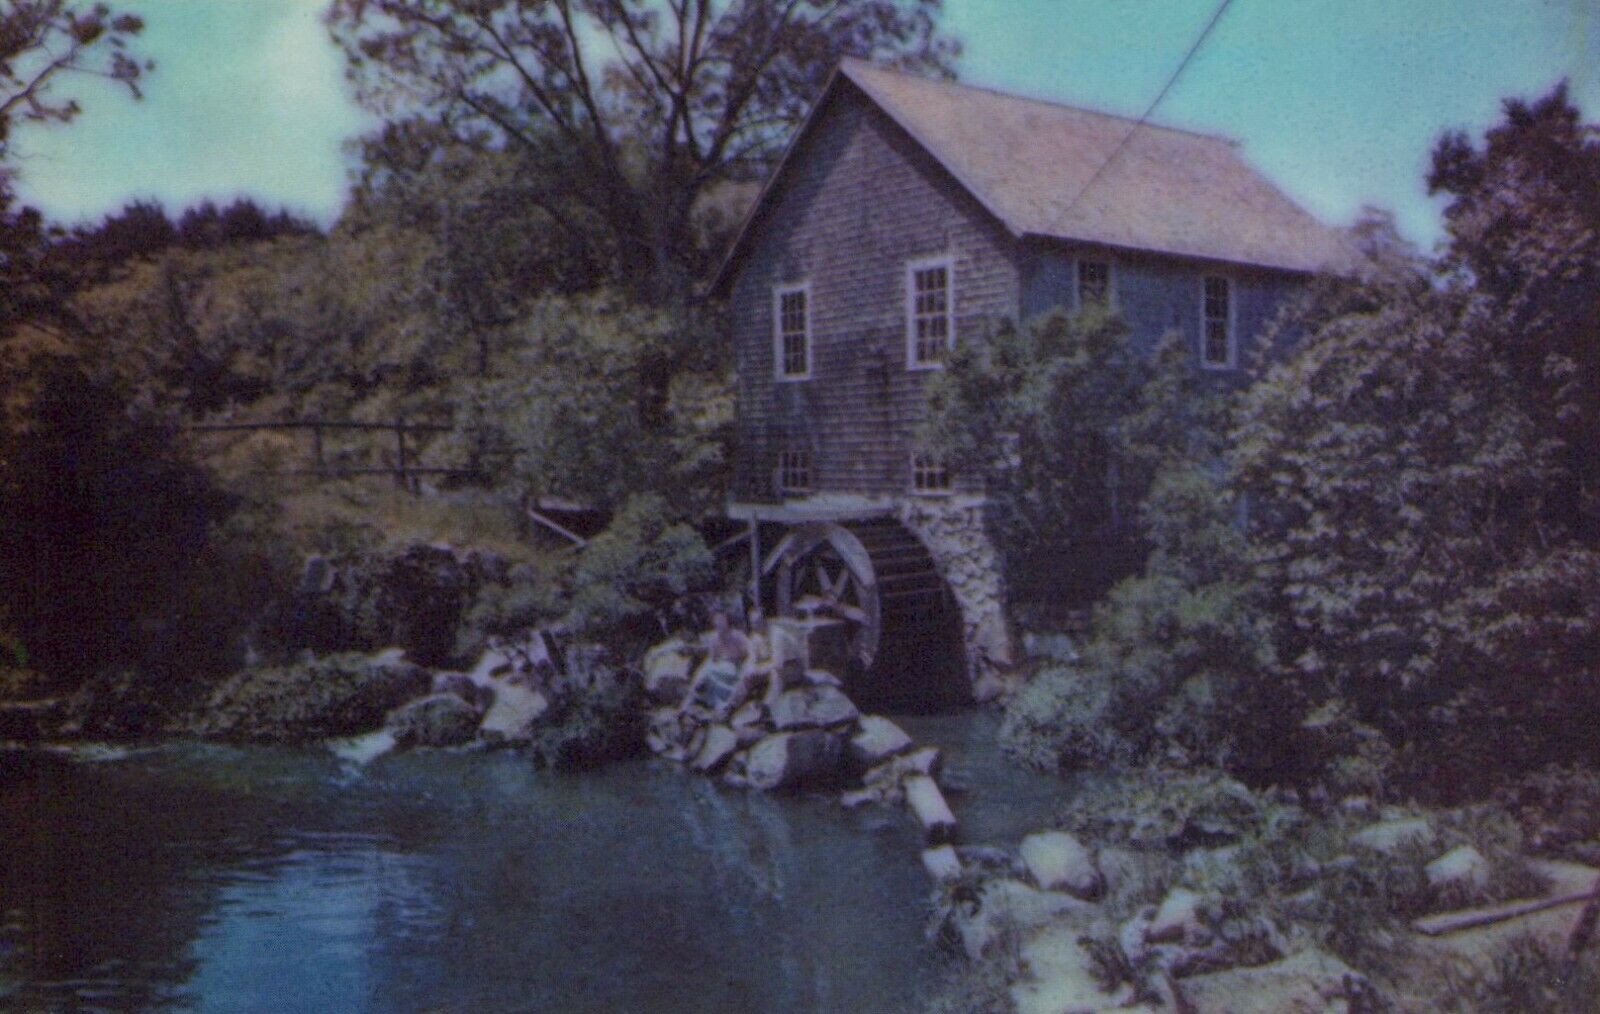 The Old Mill At Brewster Massachusetts On Cape Cod Vintage Chrome Post Card